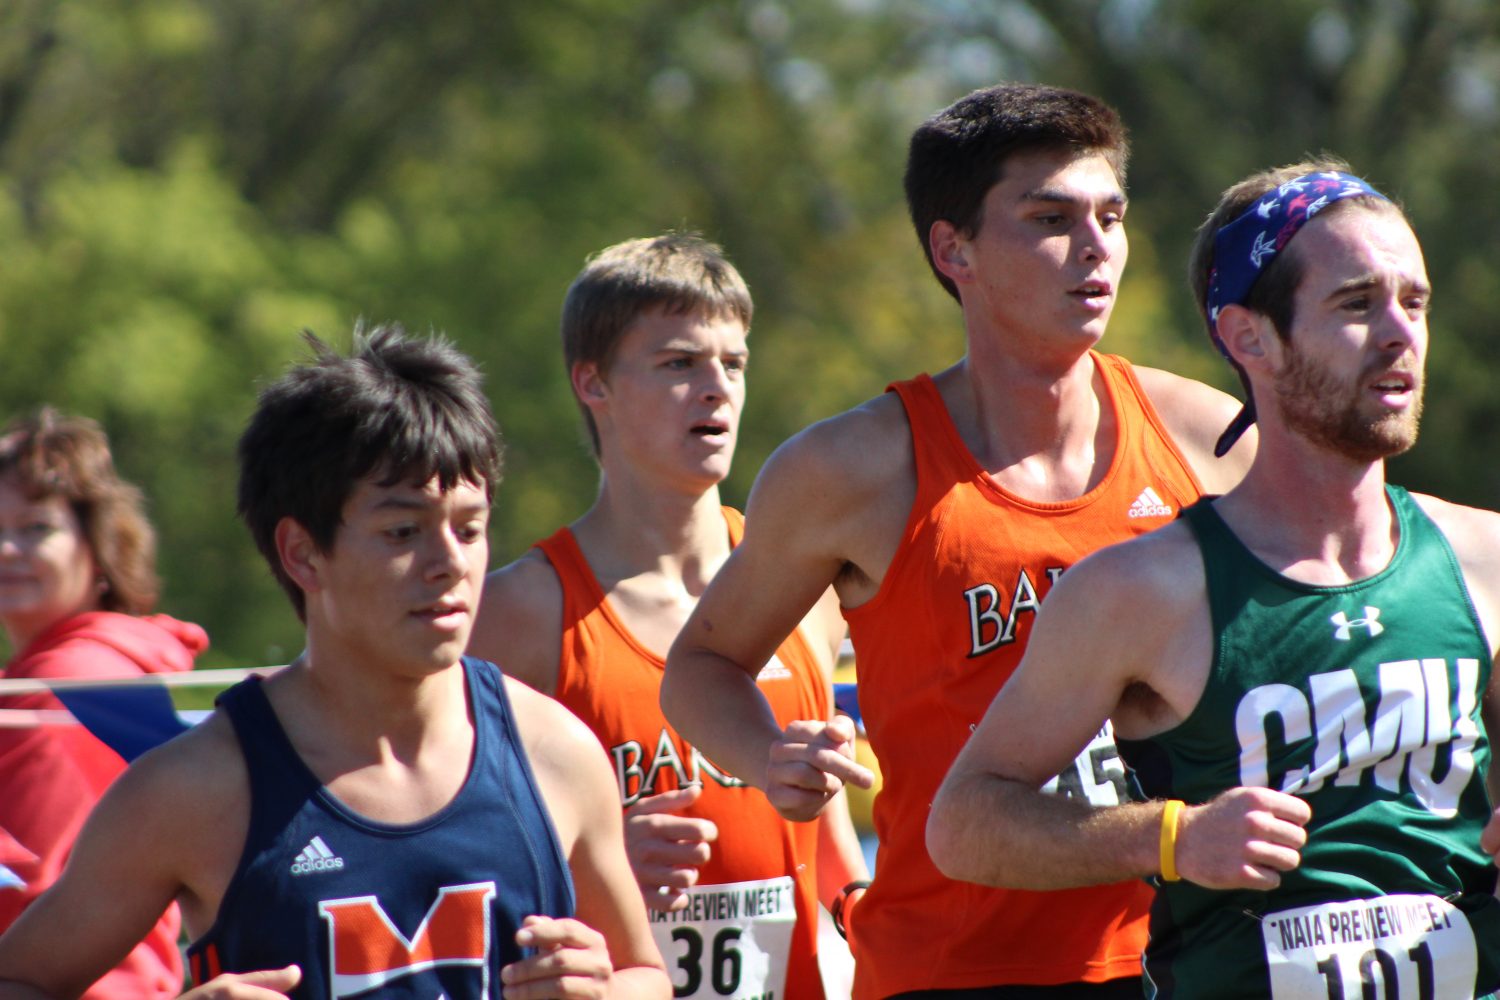 Cross country competes at pre-nationals